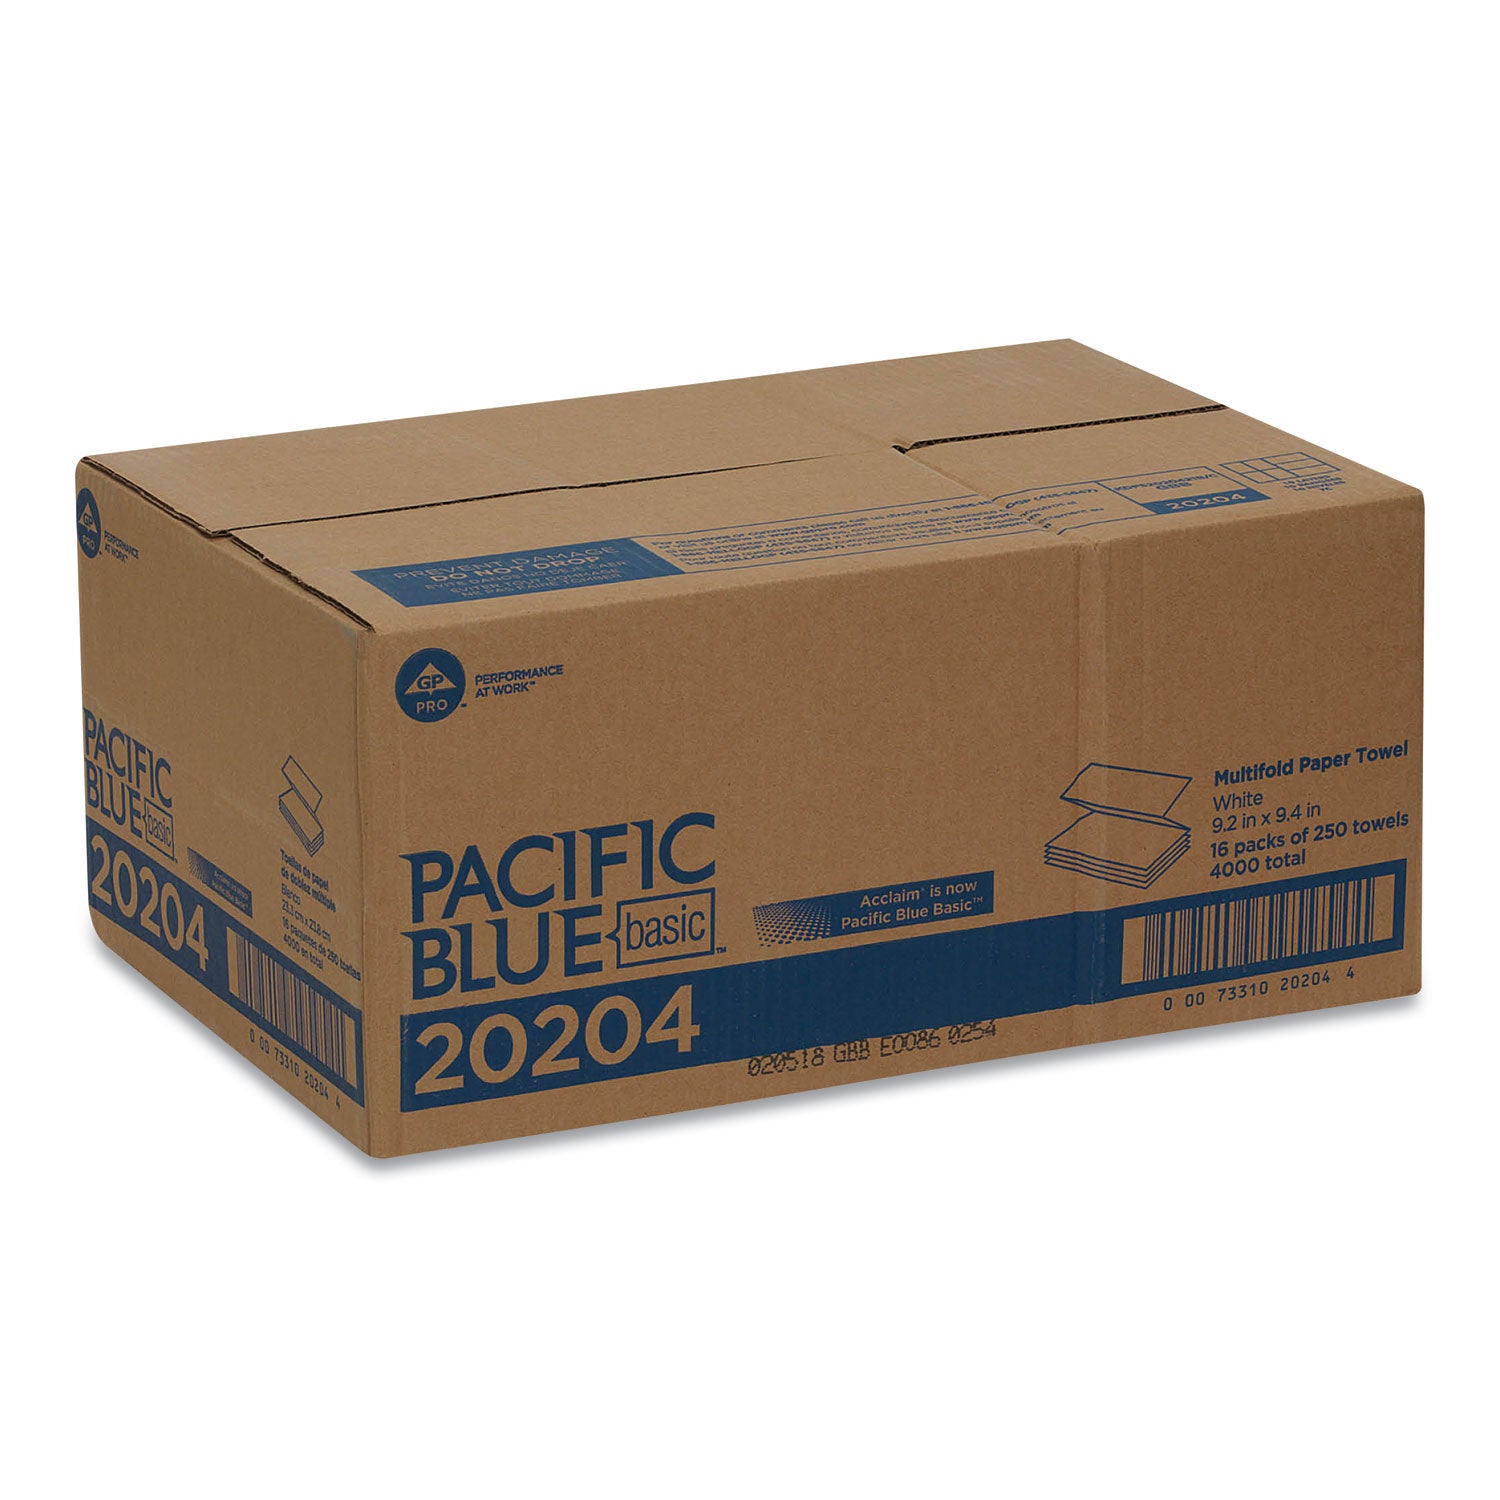 Pacific Blue Basic Folded Paper Towel, 1-Ply, 9.2 x 9.4, White, 250/Pack, 16 Packs/Carton - 